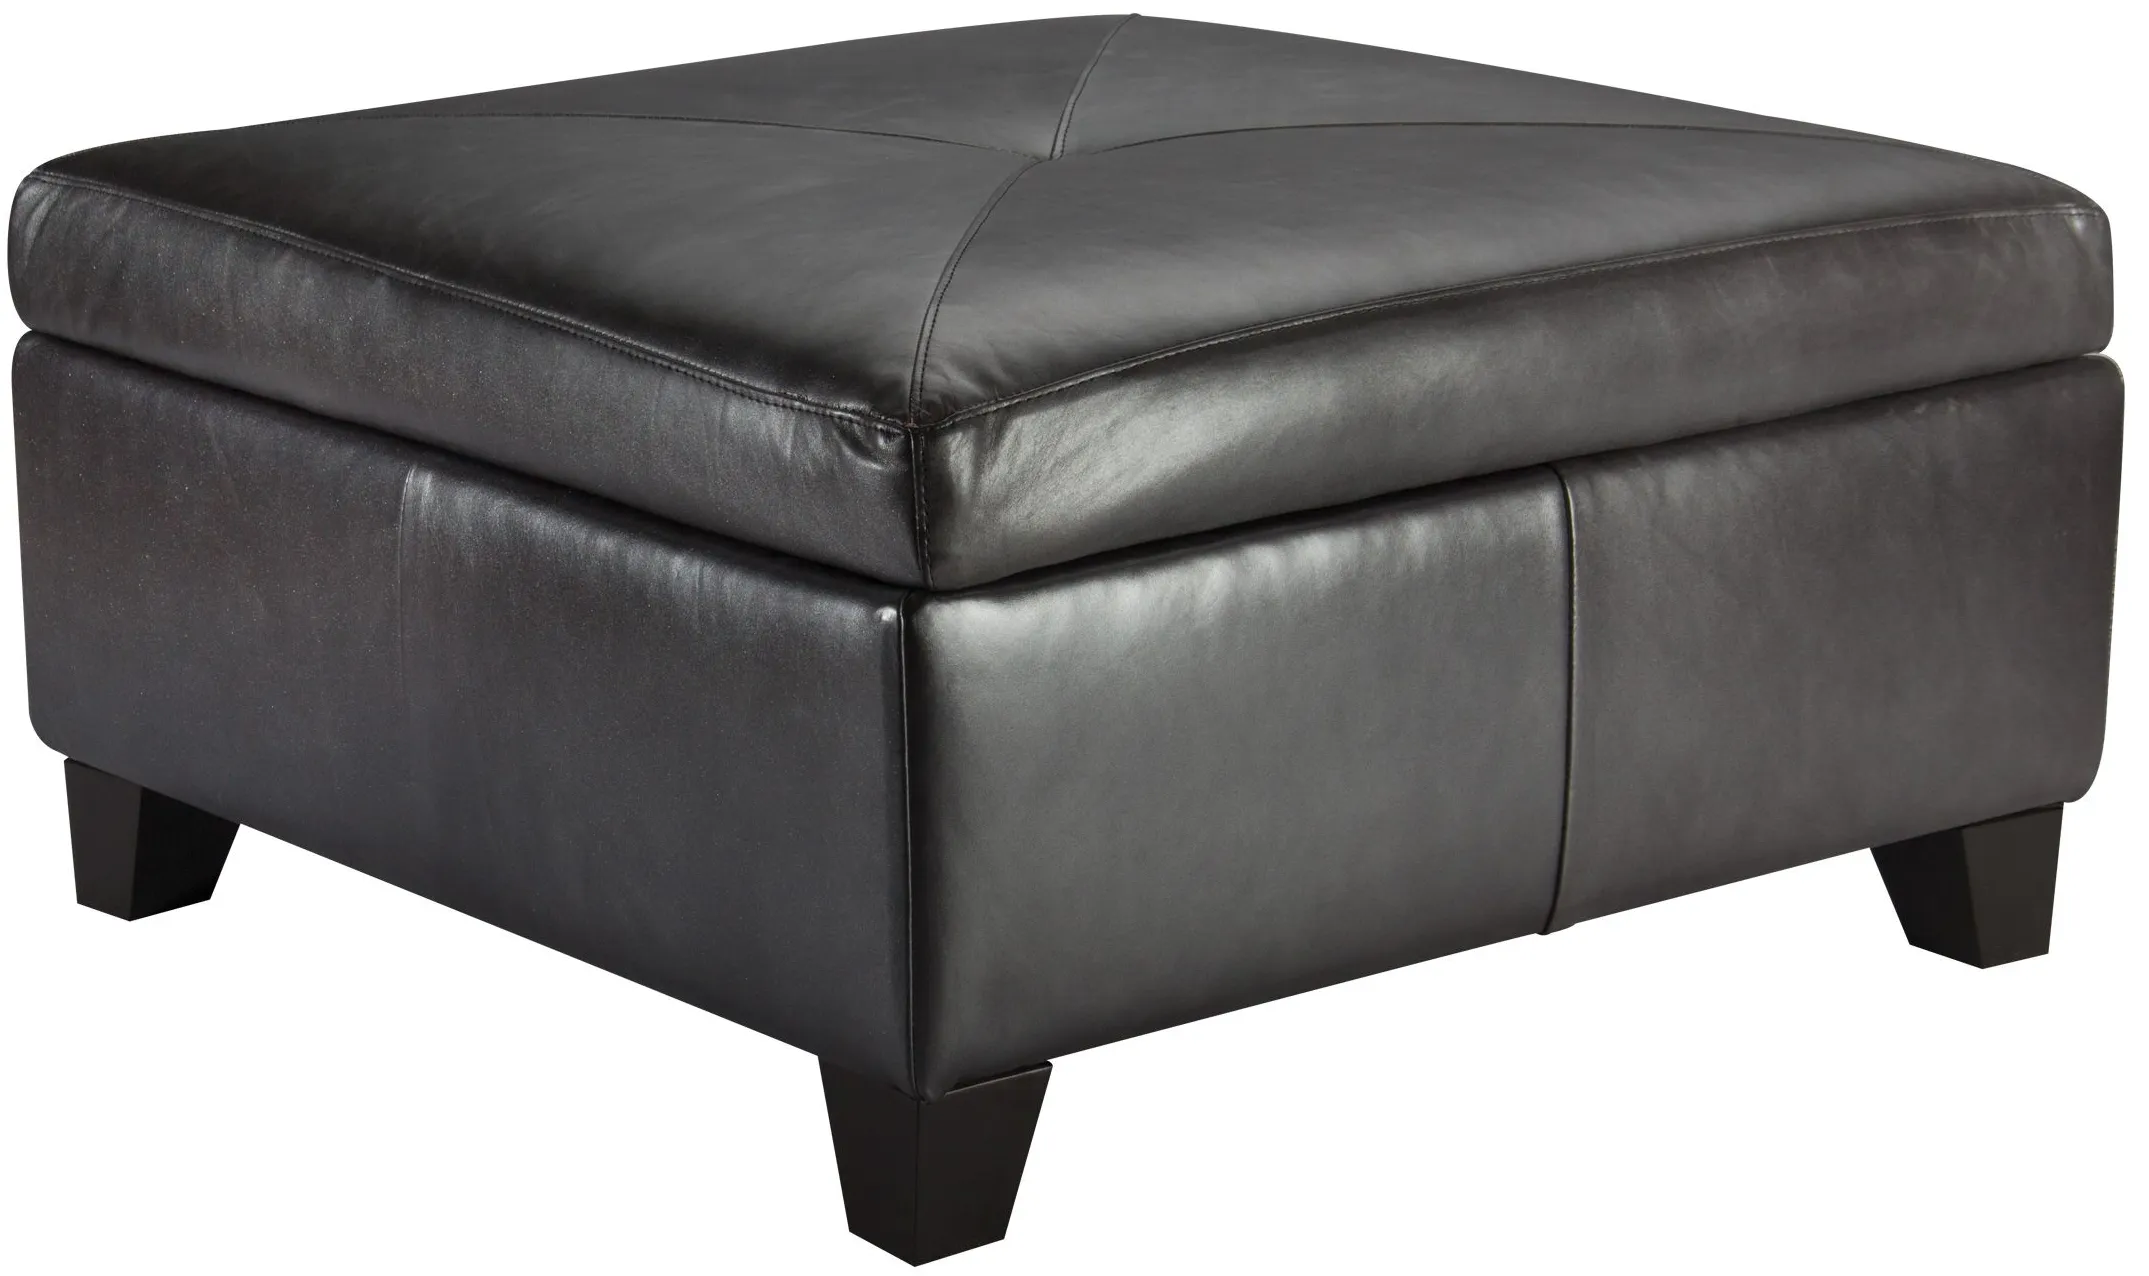 Zephyr Leather Storage Ottoman by Jonathan Louis